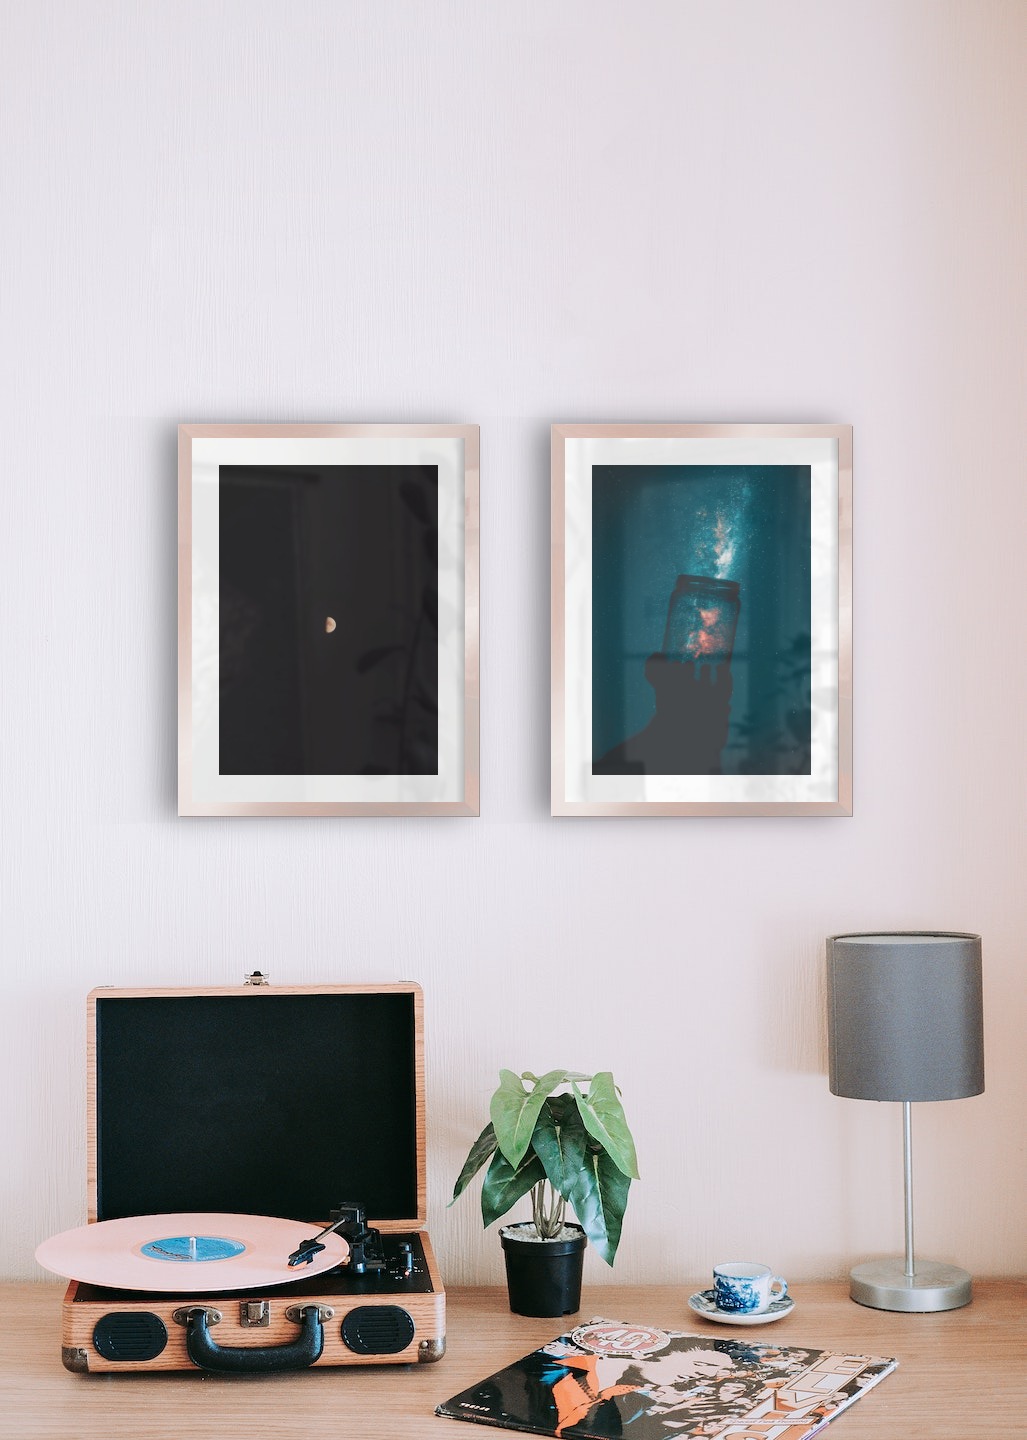 Gallery wall with picture frames in copper in sizes 30x40 with prints "The moon" and "Jar in front of space"